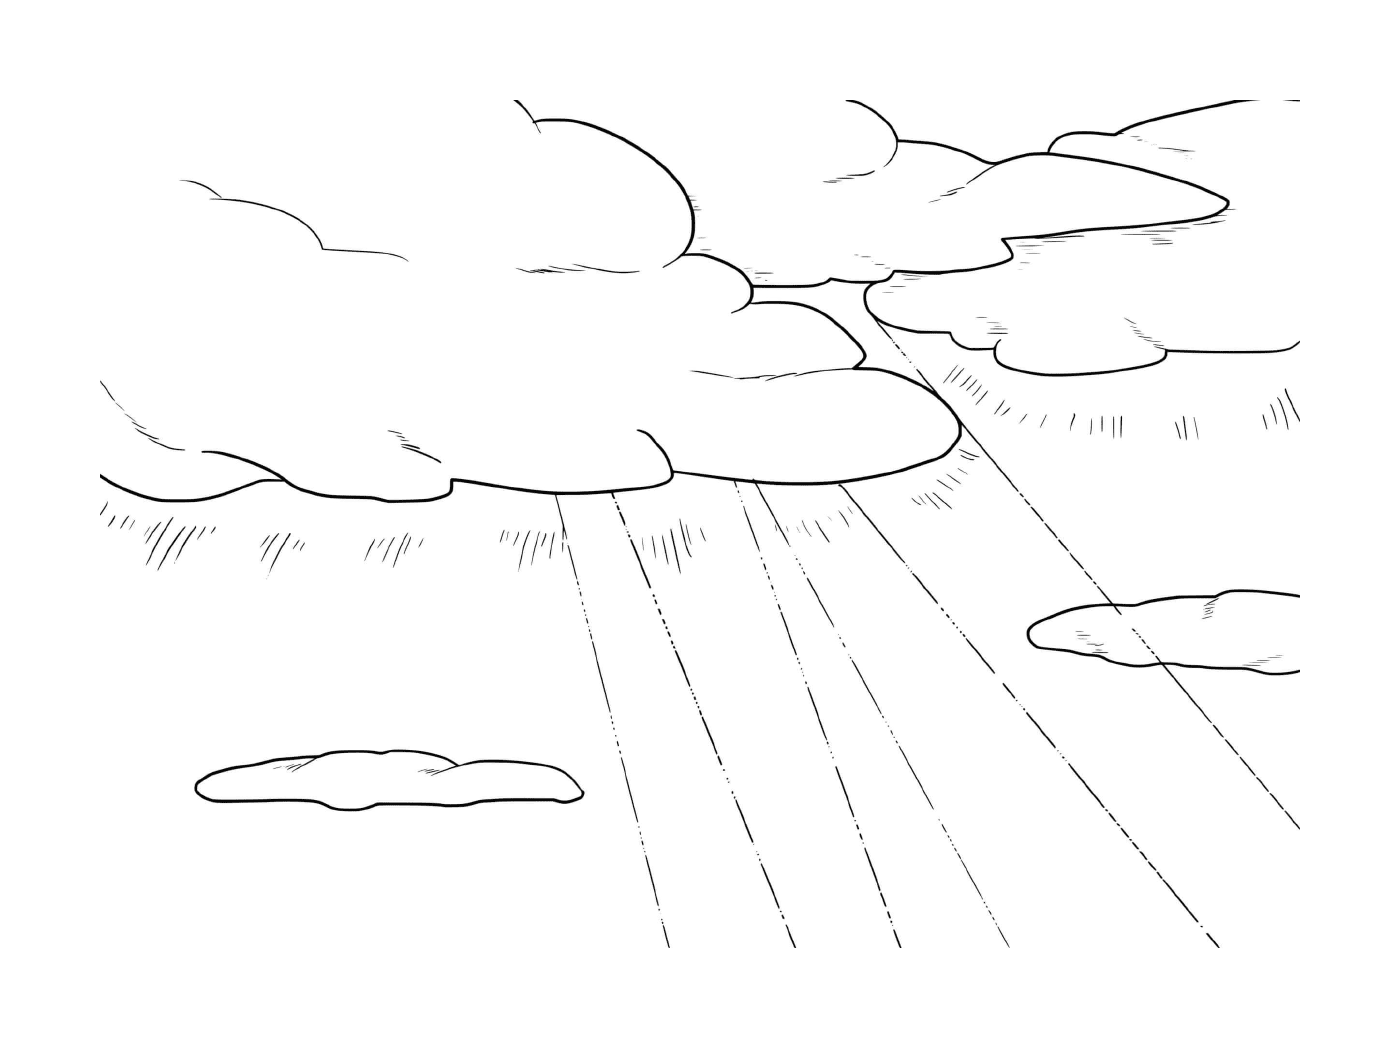  Transfiguration, line and sky with clouds 